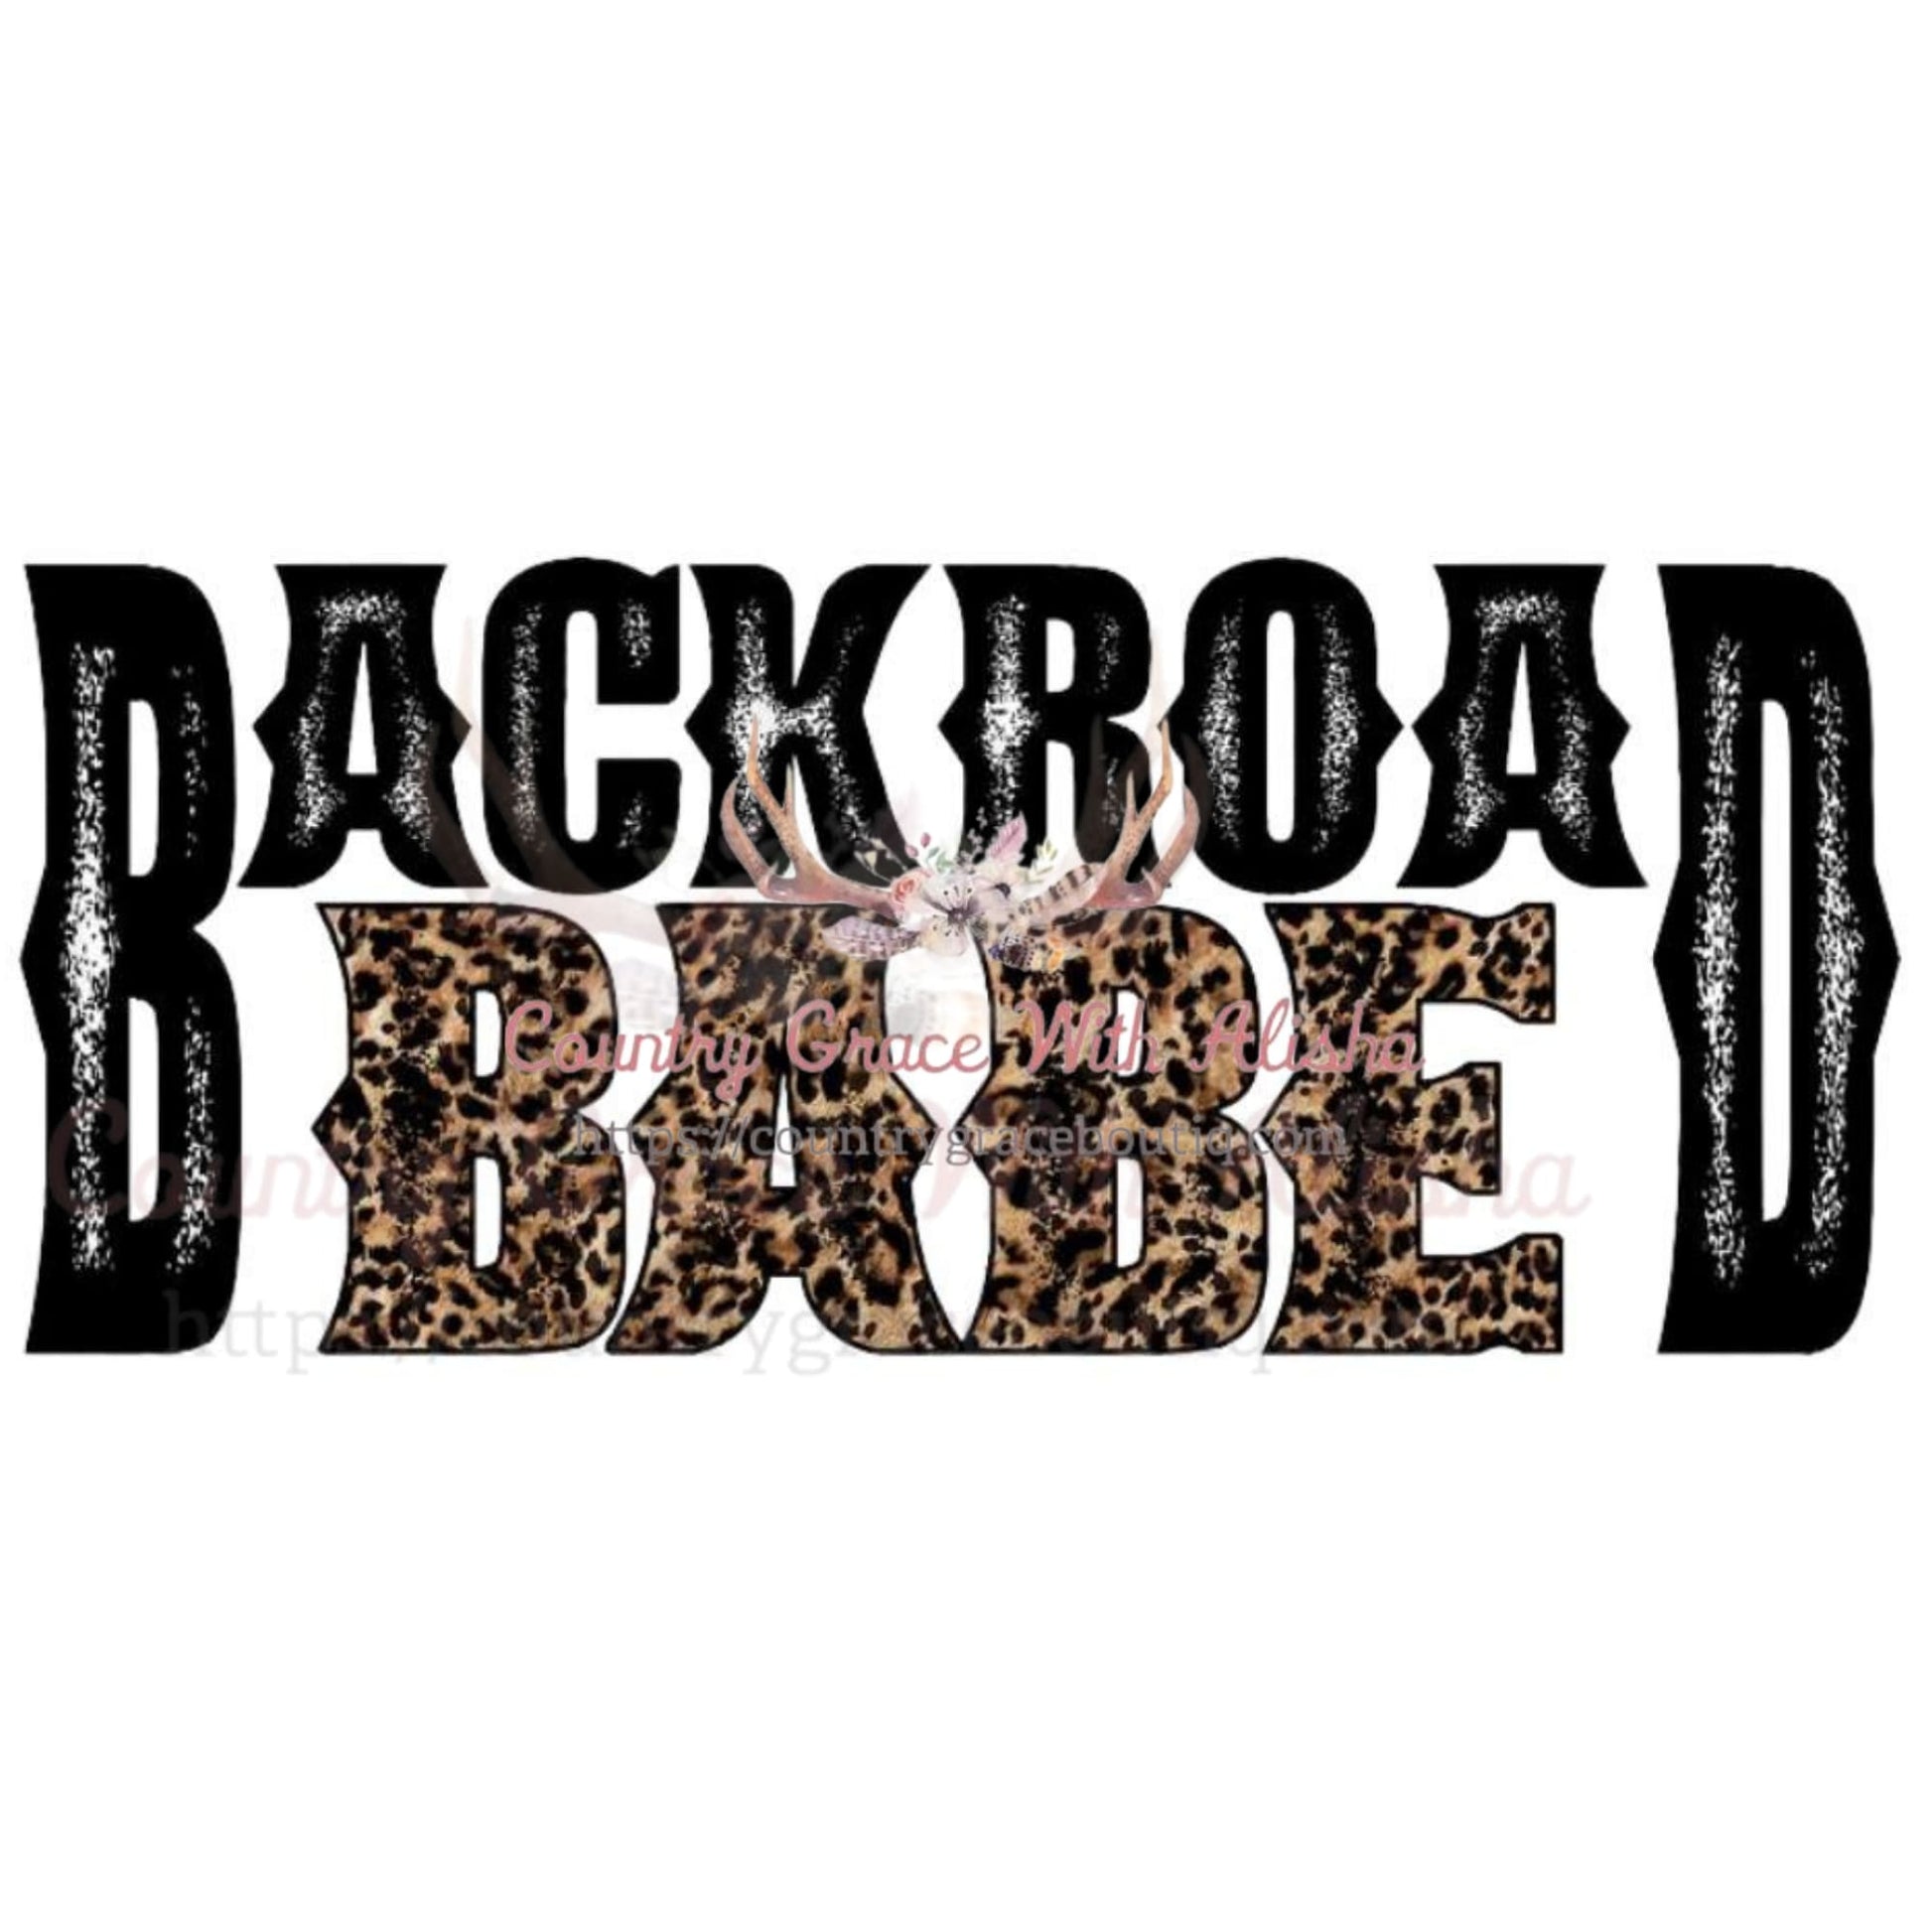 Backroad Babe Sublimation Transfer - Sub $1.50 Country Grace